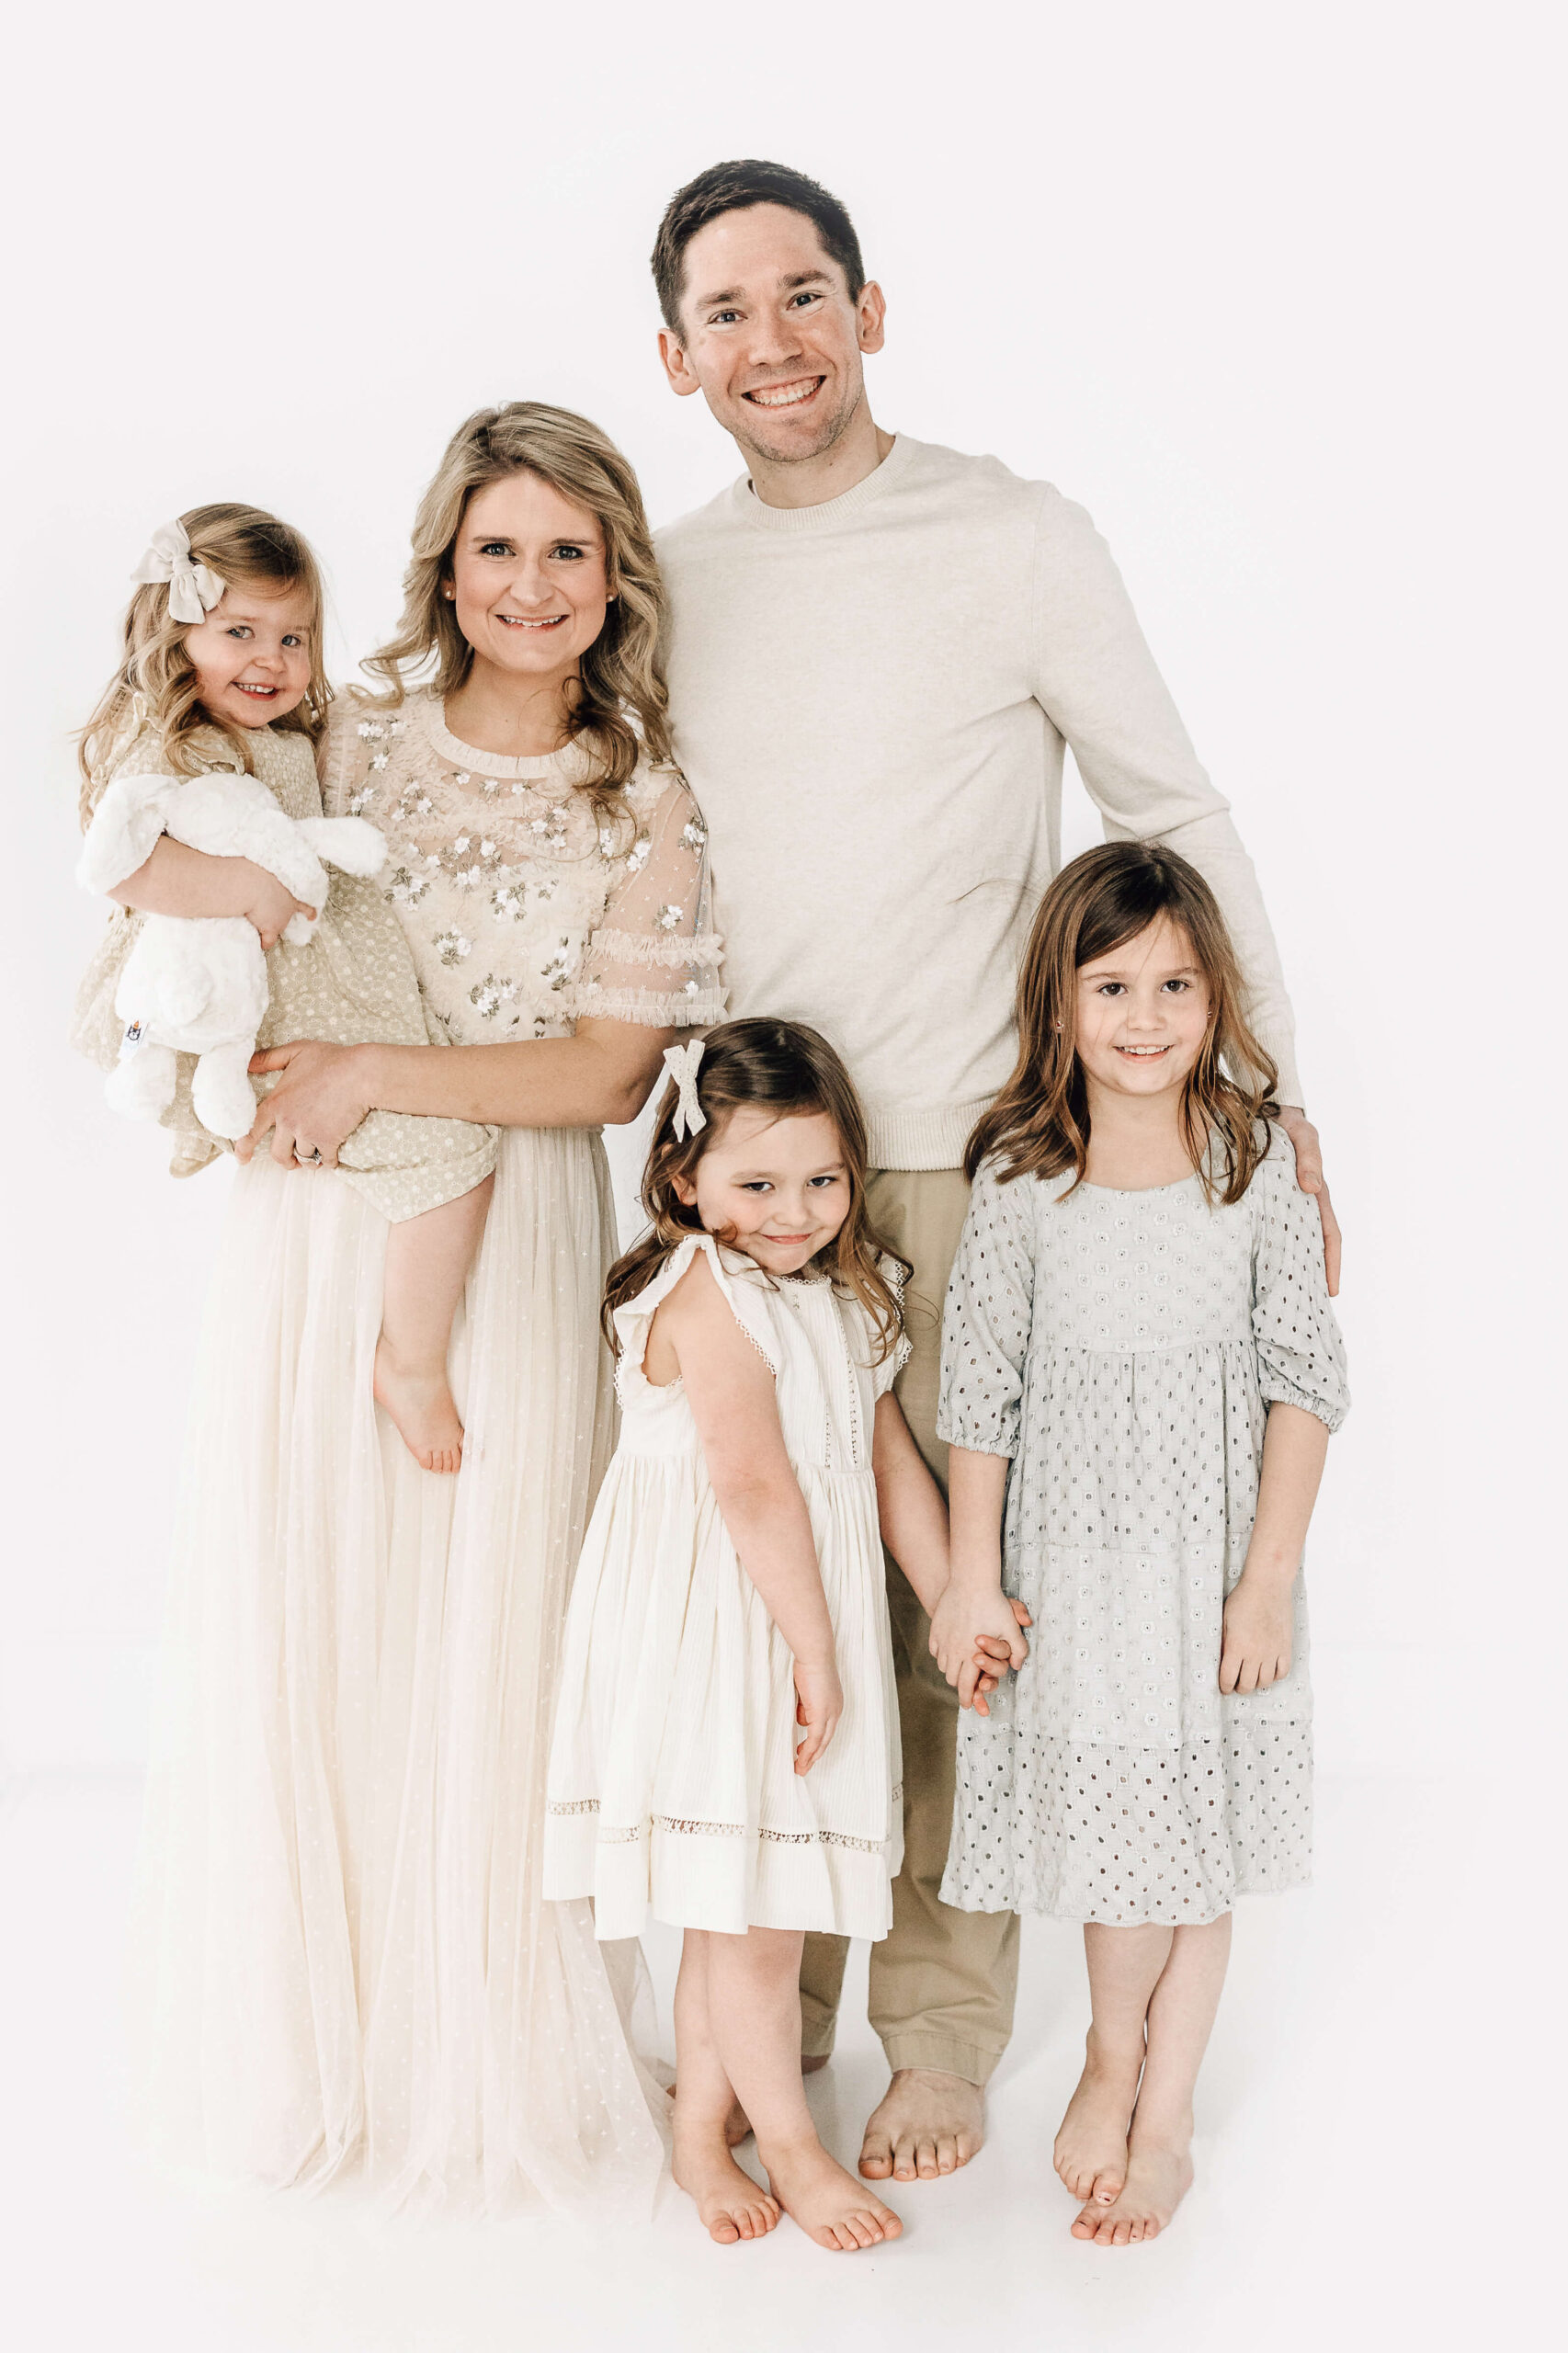 family portraits for family of 5 in light and airy studio
